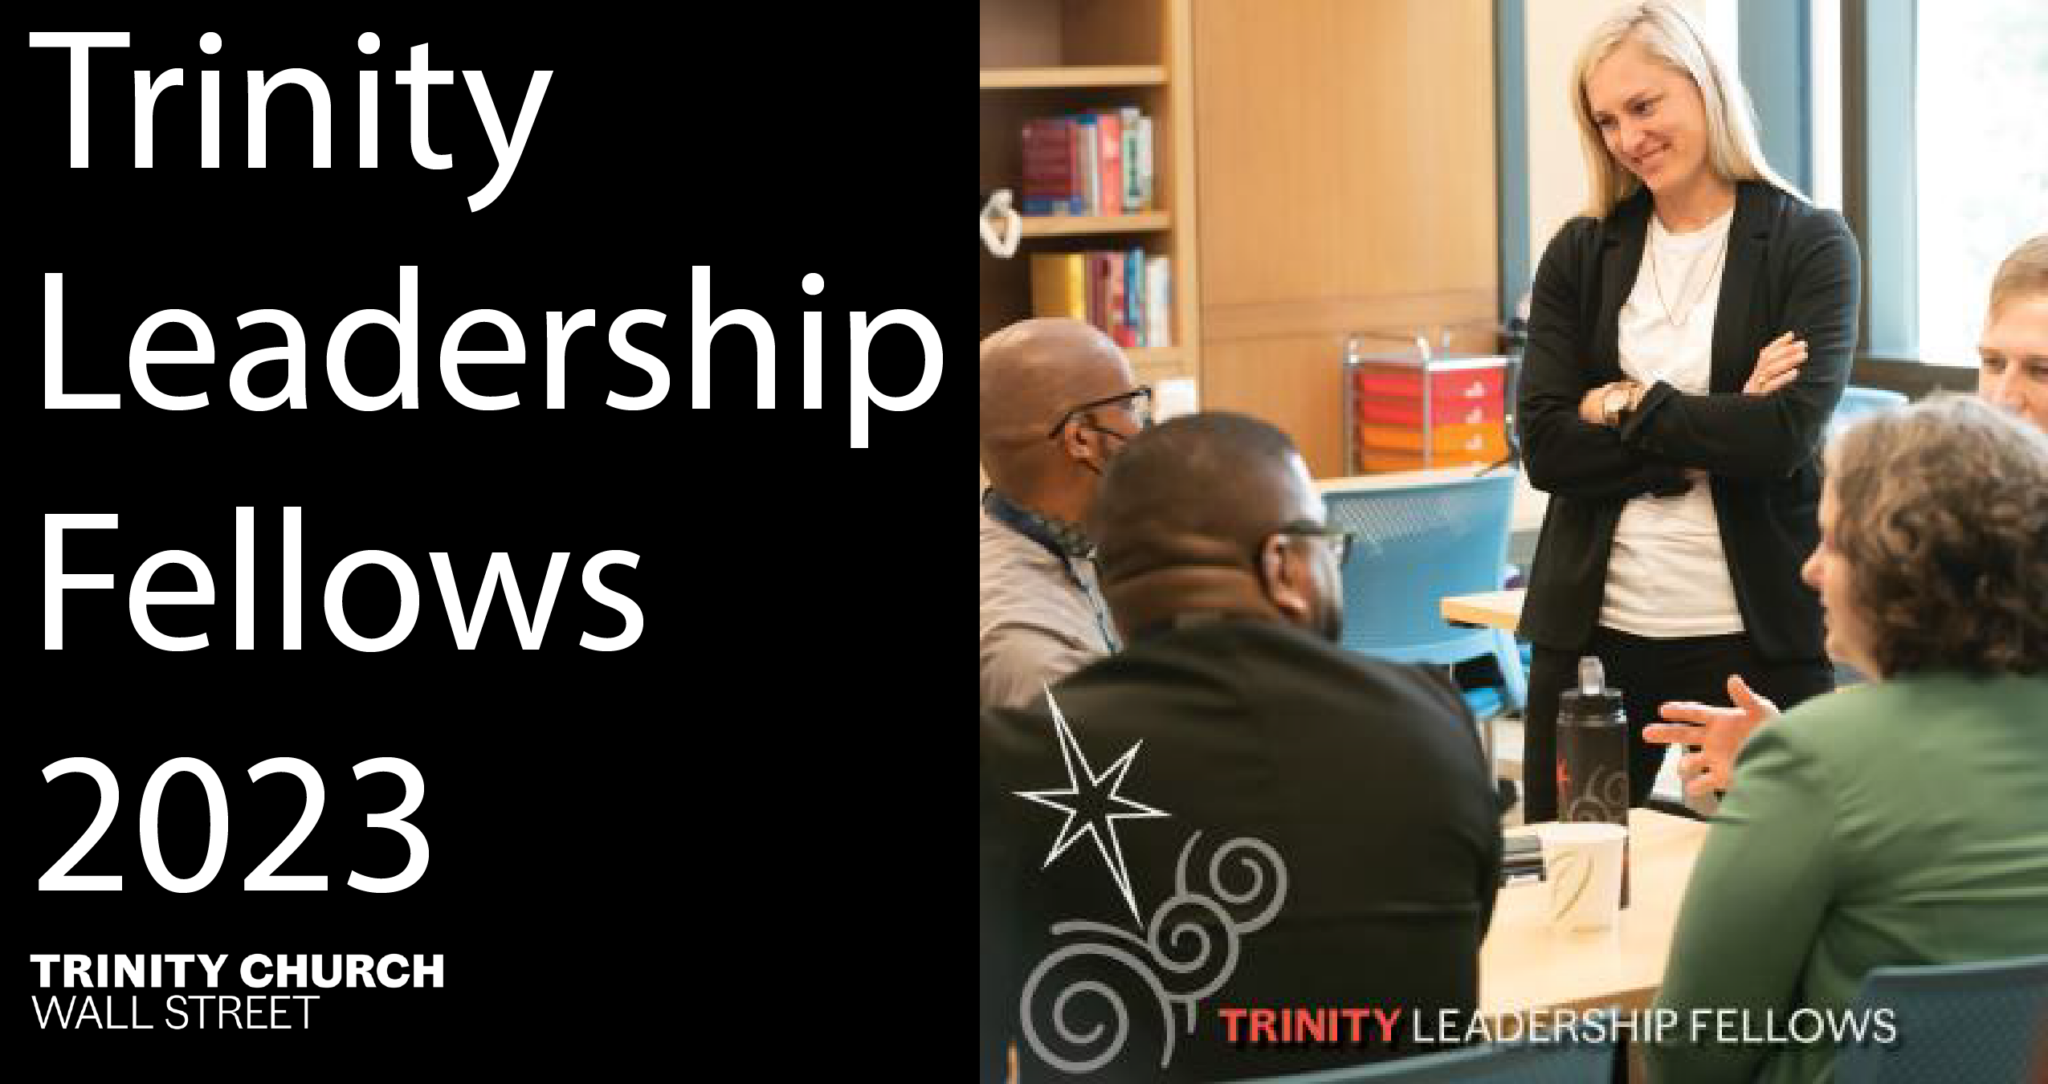 trinity-leadership-fellows-2023-youth-opportunities